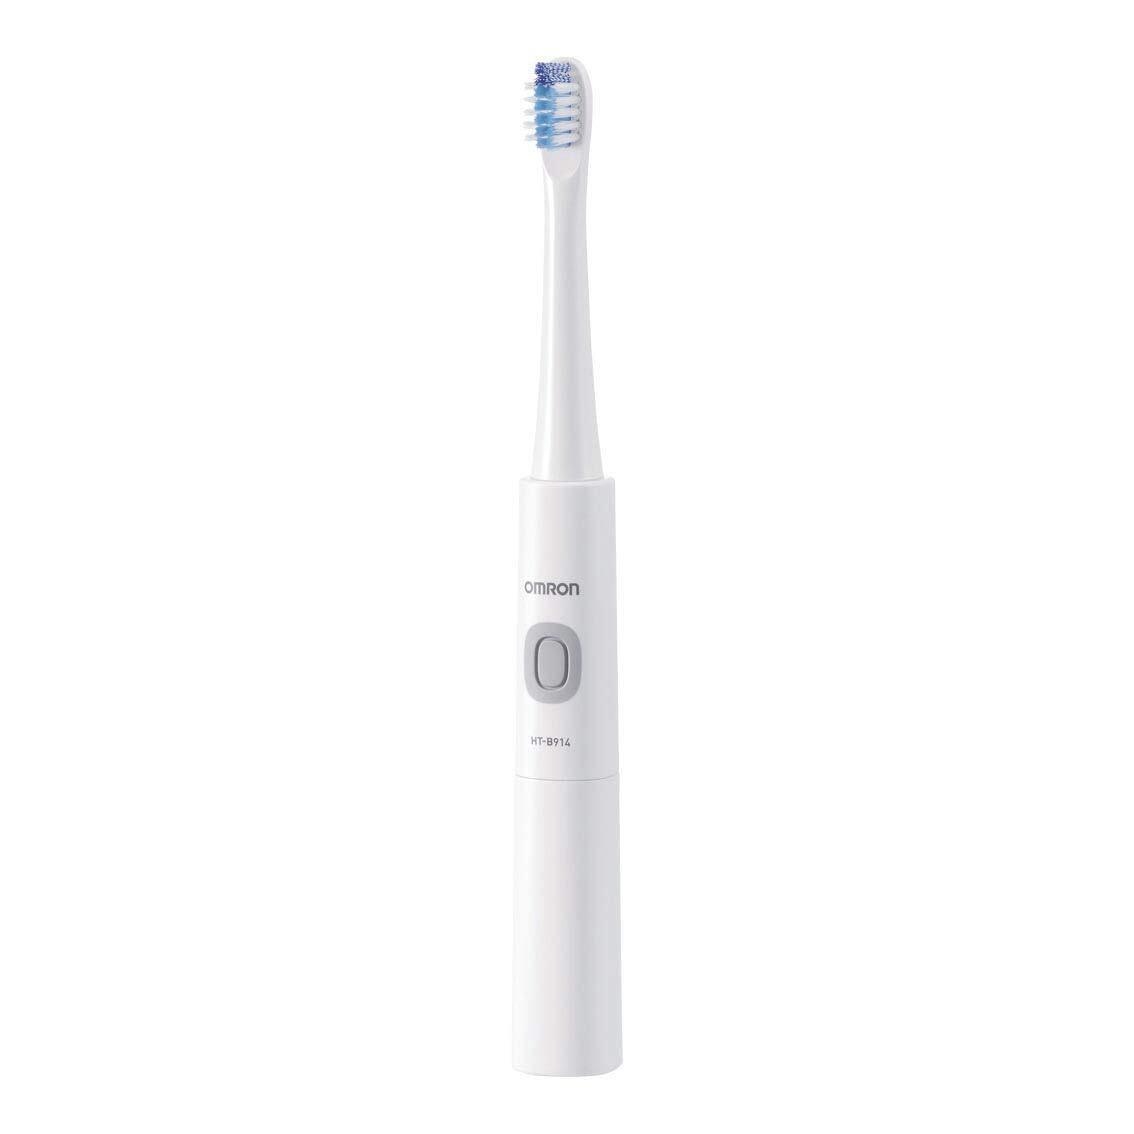 Omron Sonic Electric Toothbrush 1 Piece X 1 Timer Battery Operated